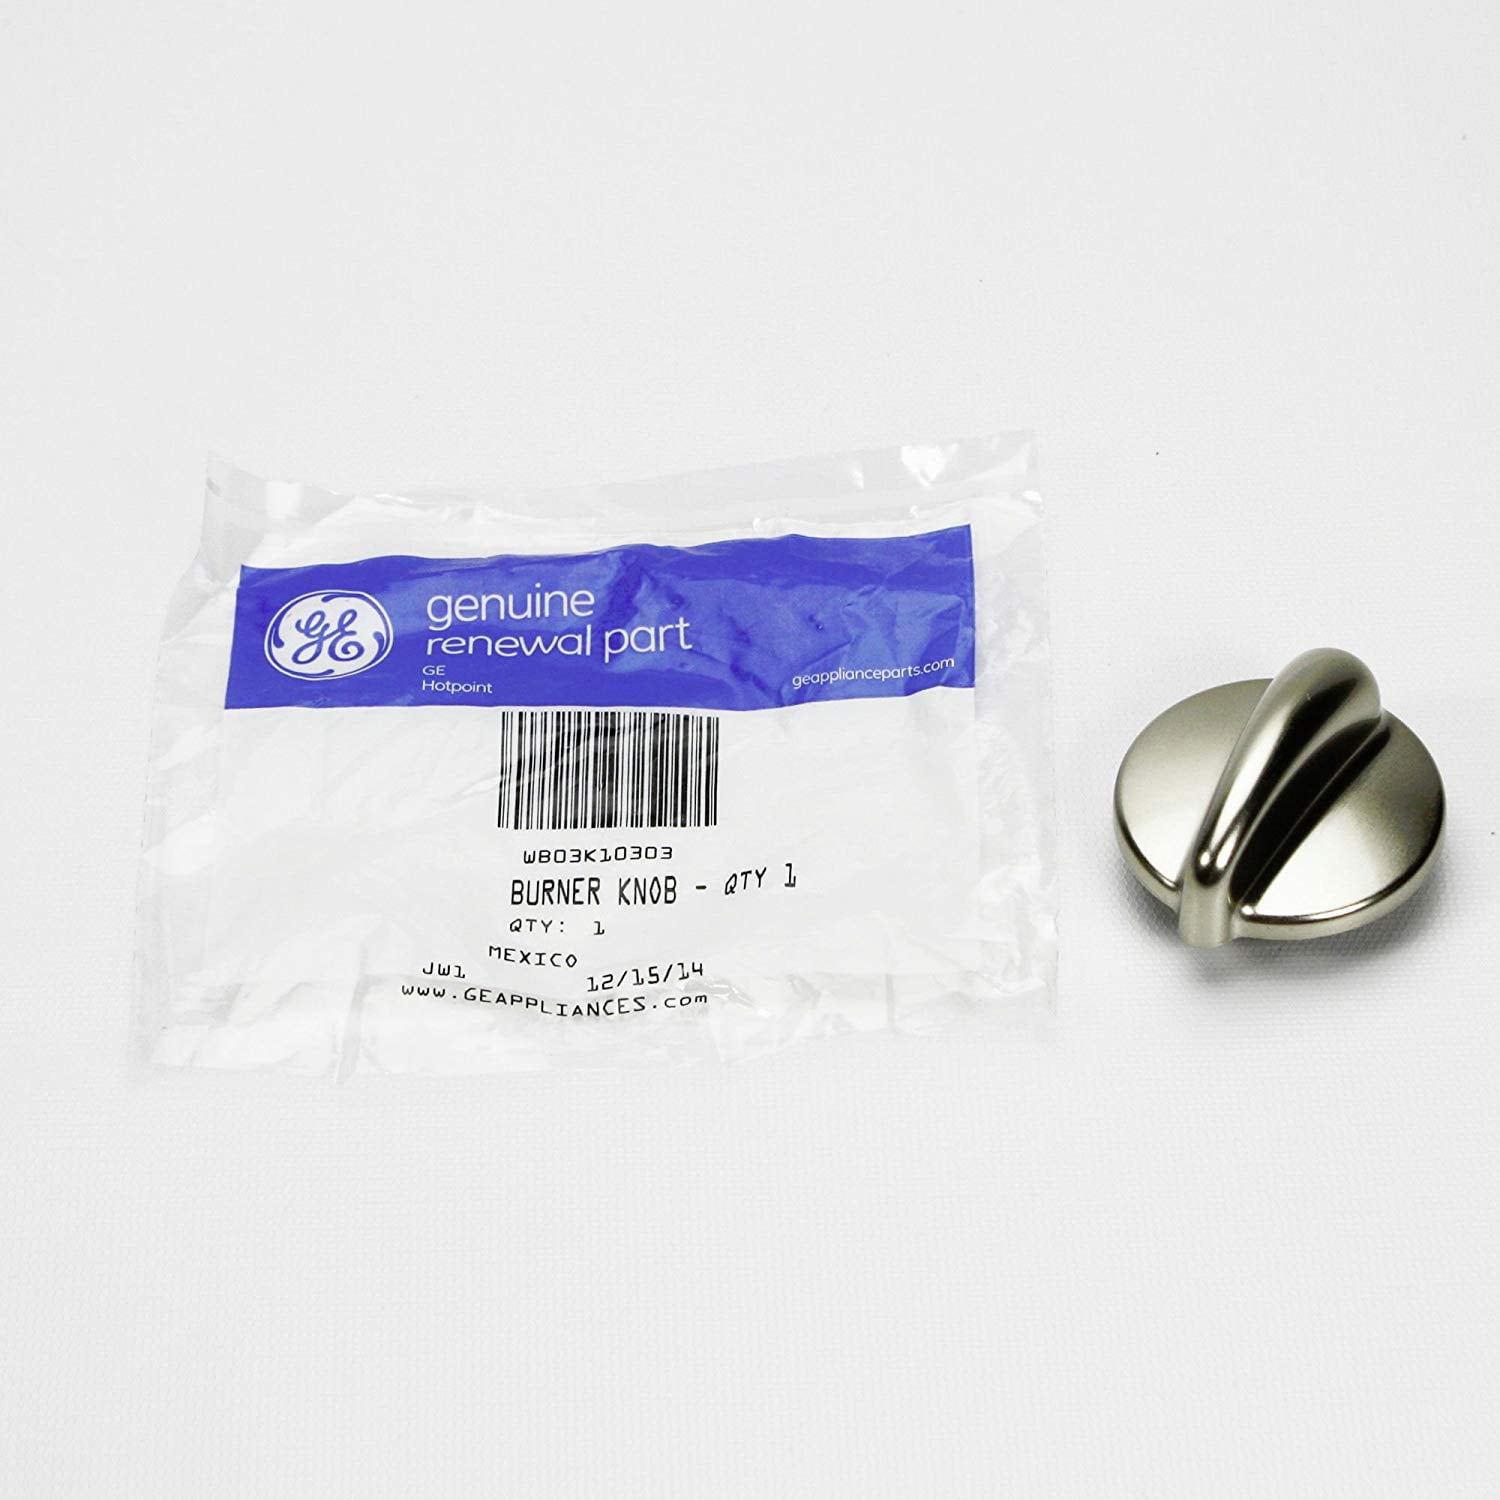 Details about   WH11X10033  WH01X10061 Genuine GE Washer Timer Knob & Dial Package 